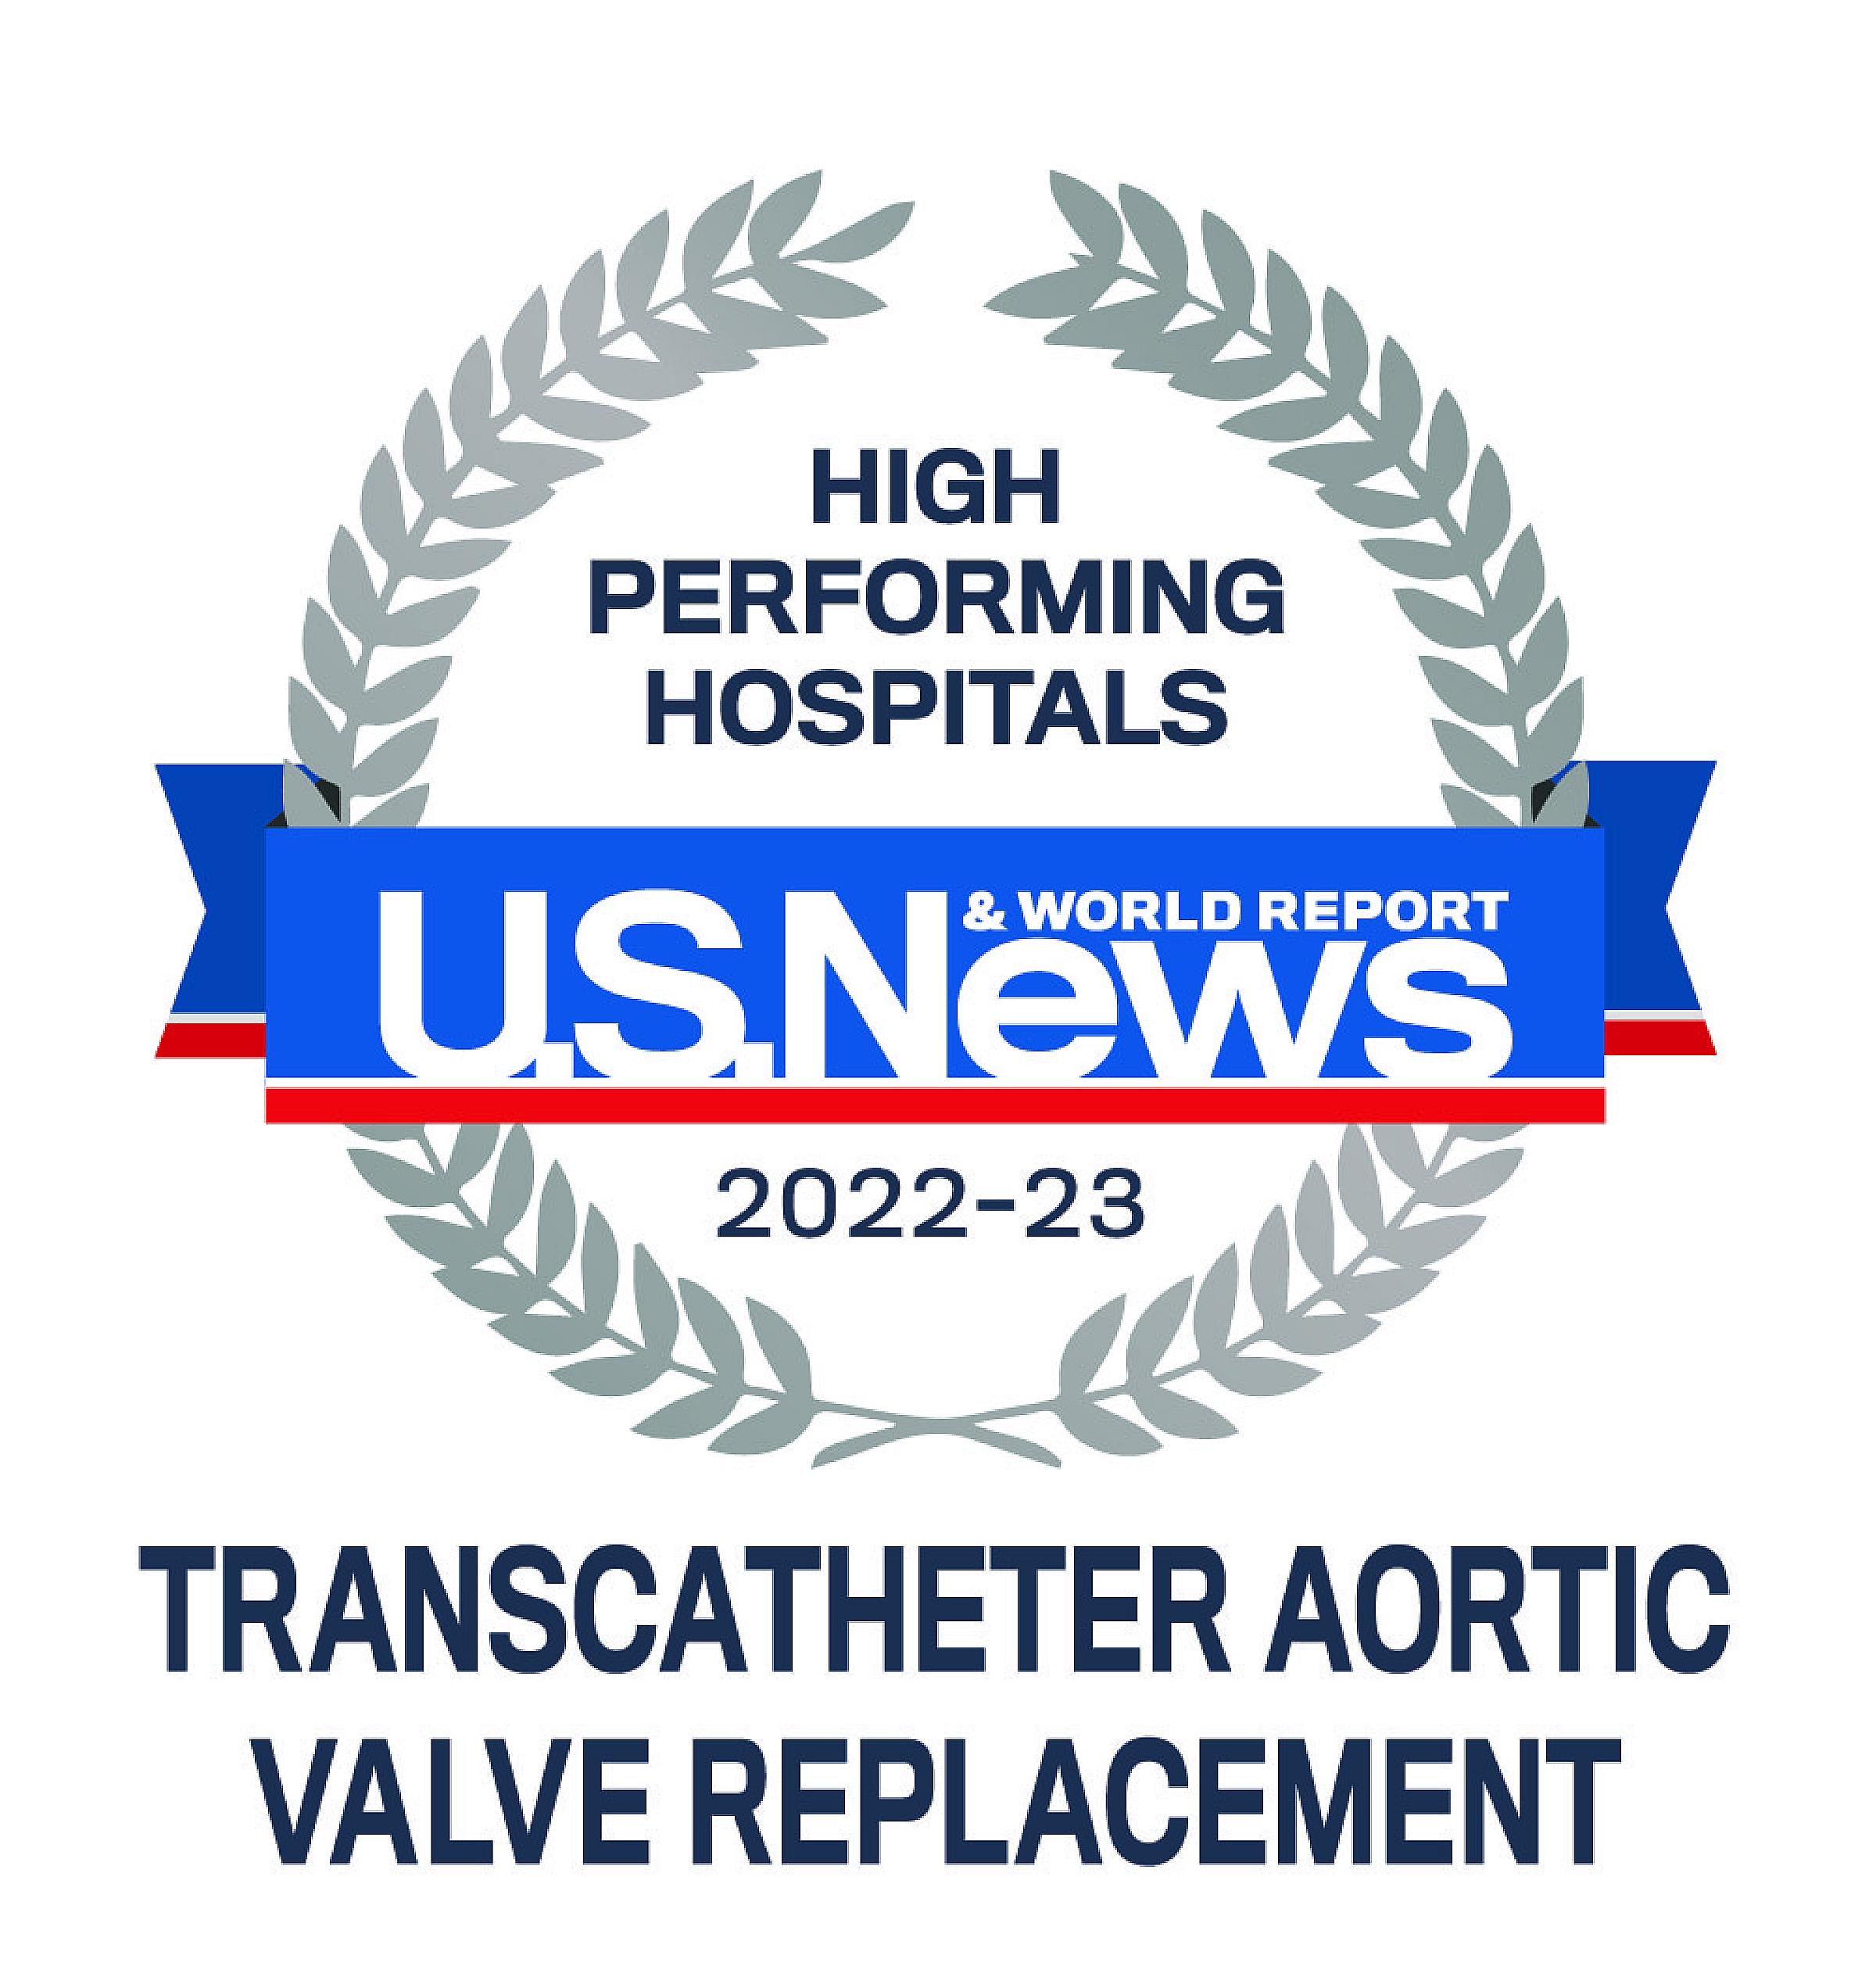 US News 2022-23 High Performing Hospitals Transcatheter Aortic Valve Badge